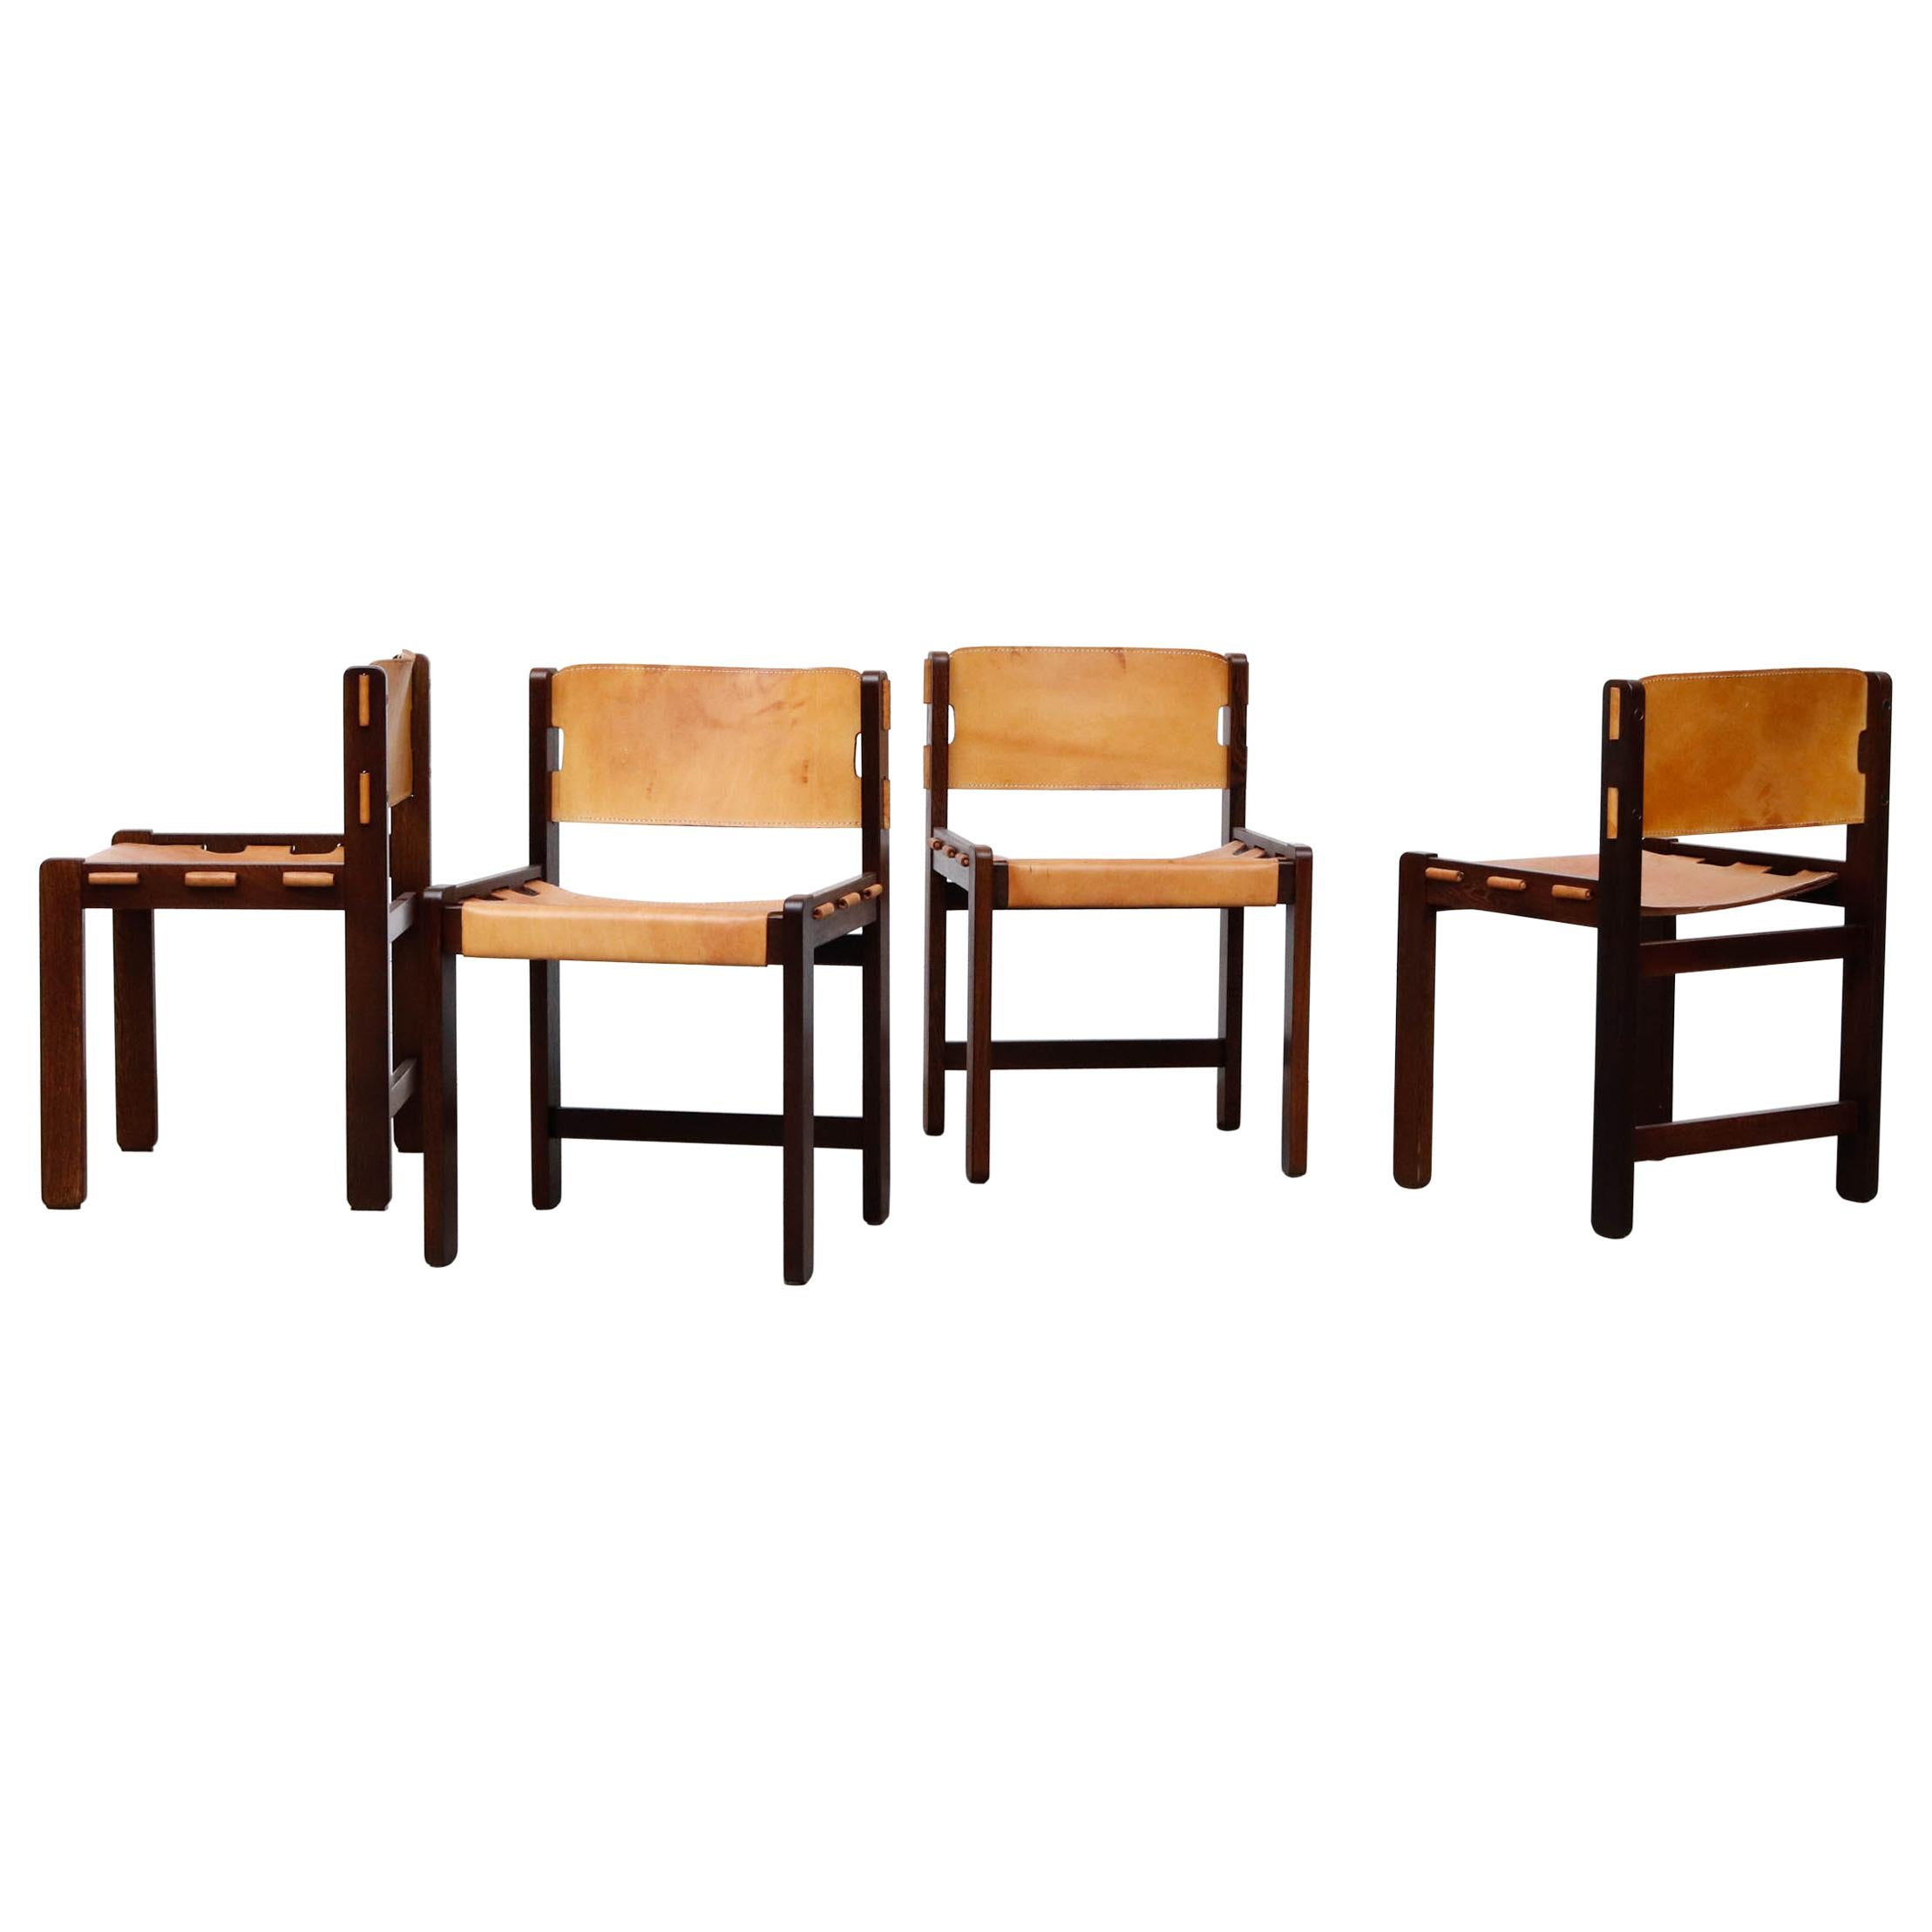 Martin Visser Set of 4 Leather and Wenge Dining Chairs